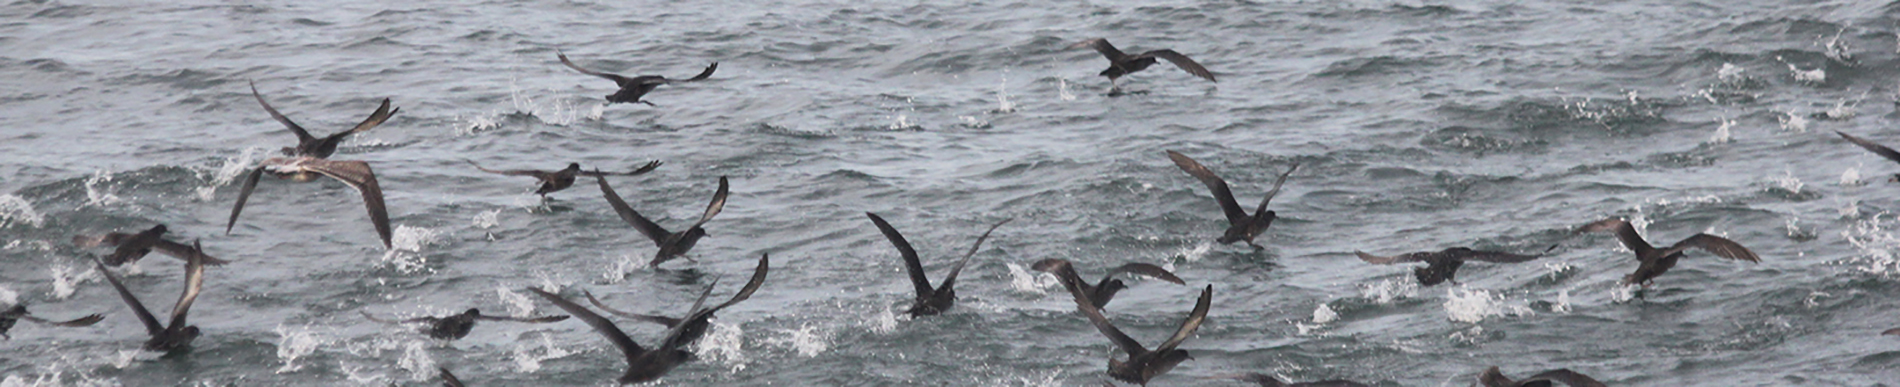 seabirds feeding at the surface of the water